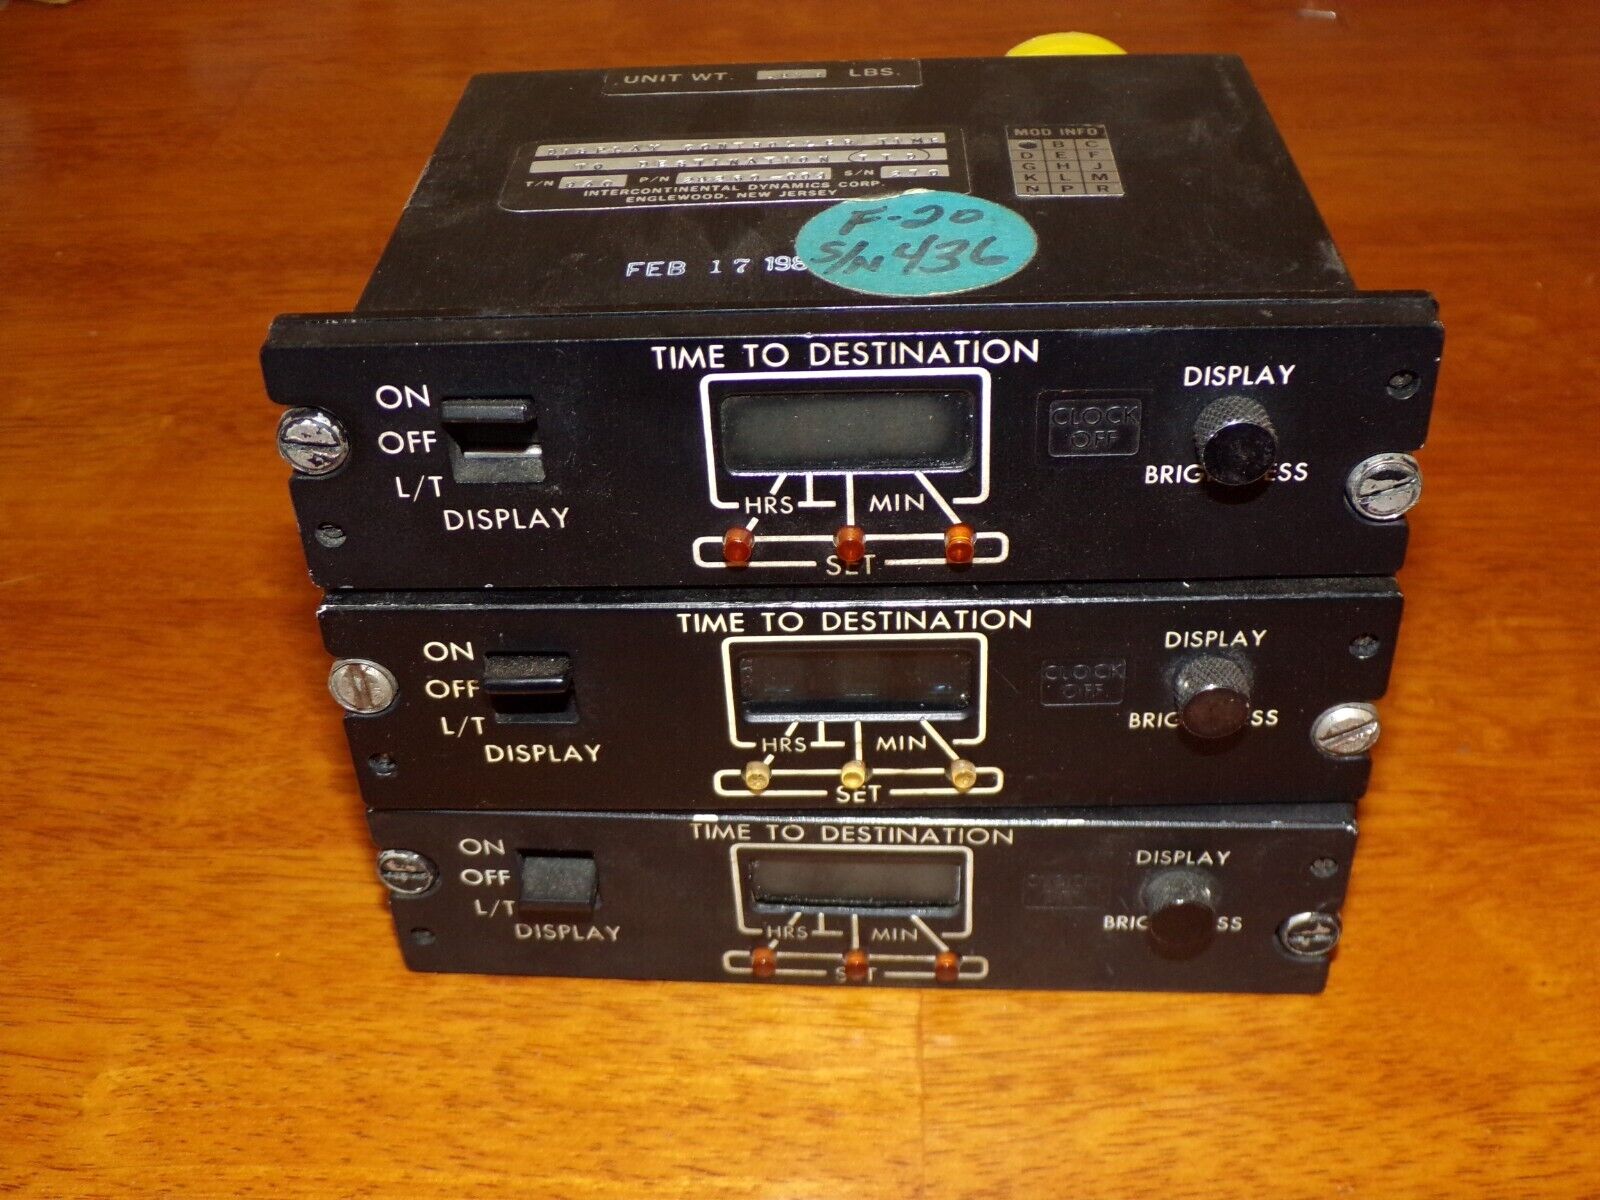 IDC Aircraft Time Display Controllers 28260-002 and 28260-004